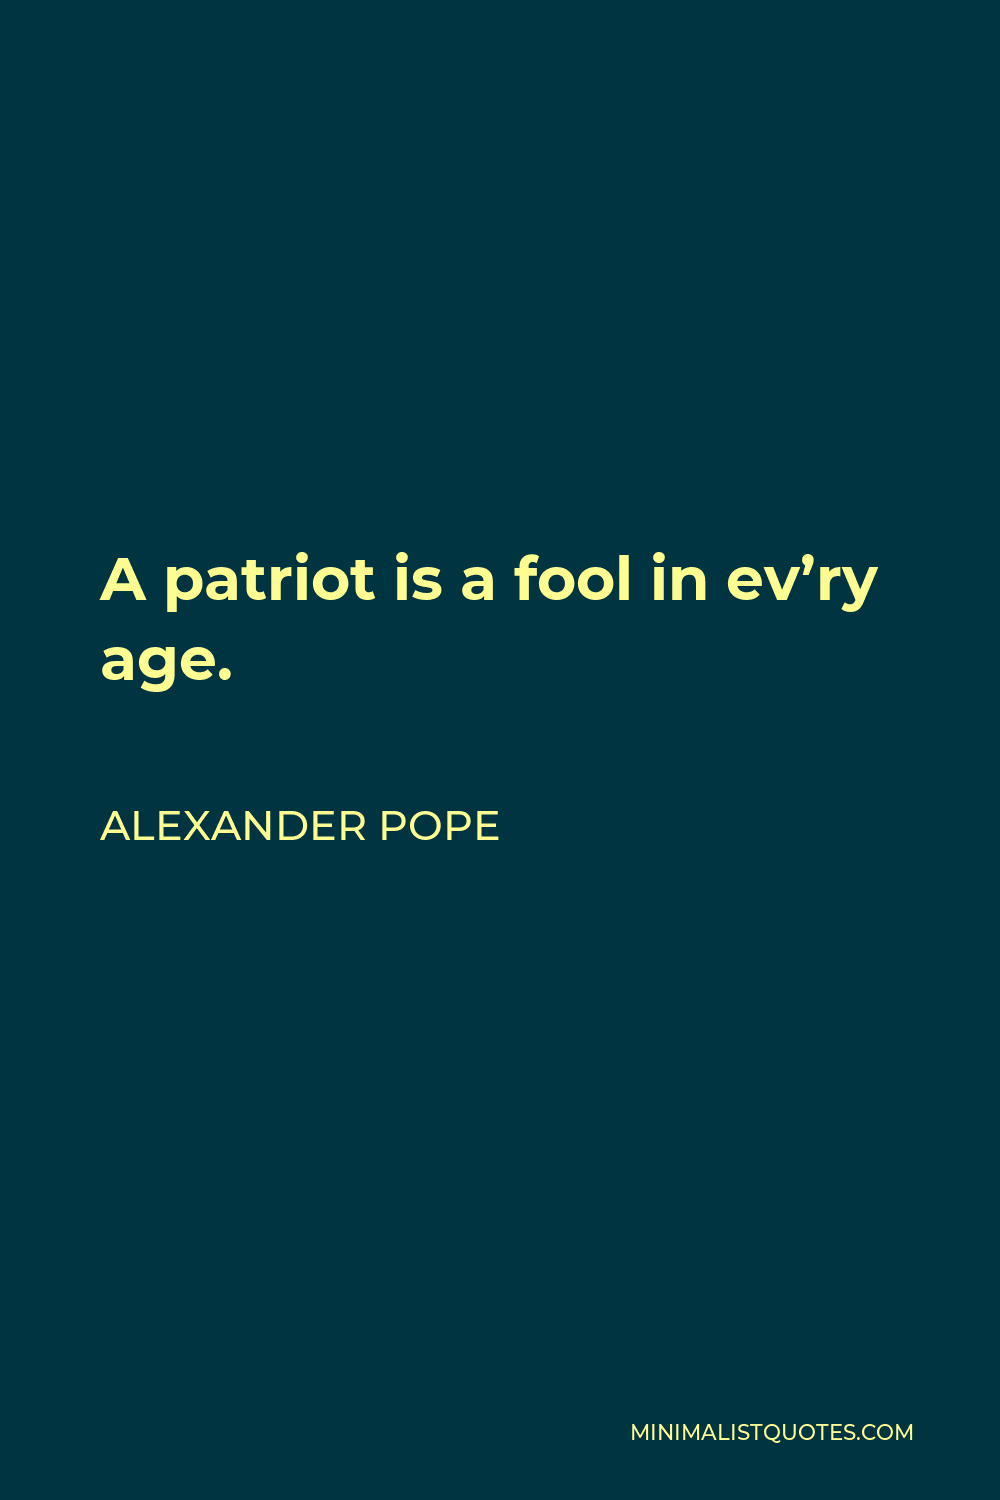 Alexander Pope Quote - A patriot is a fool in ev’ry age.